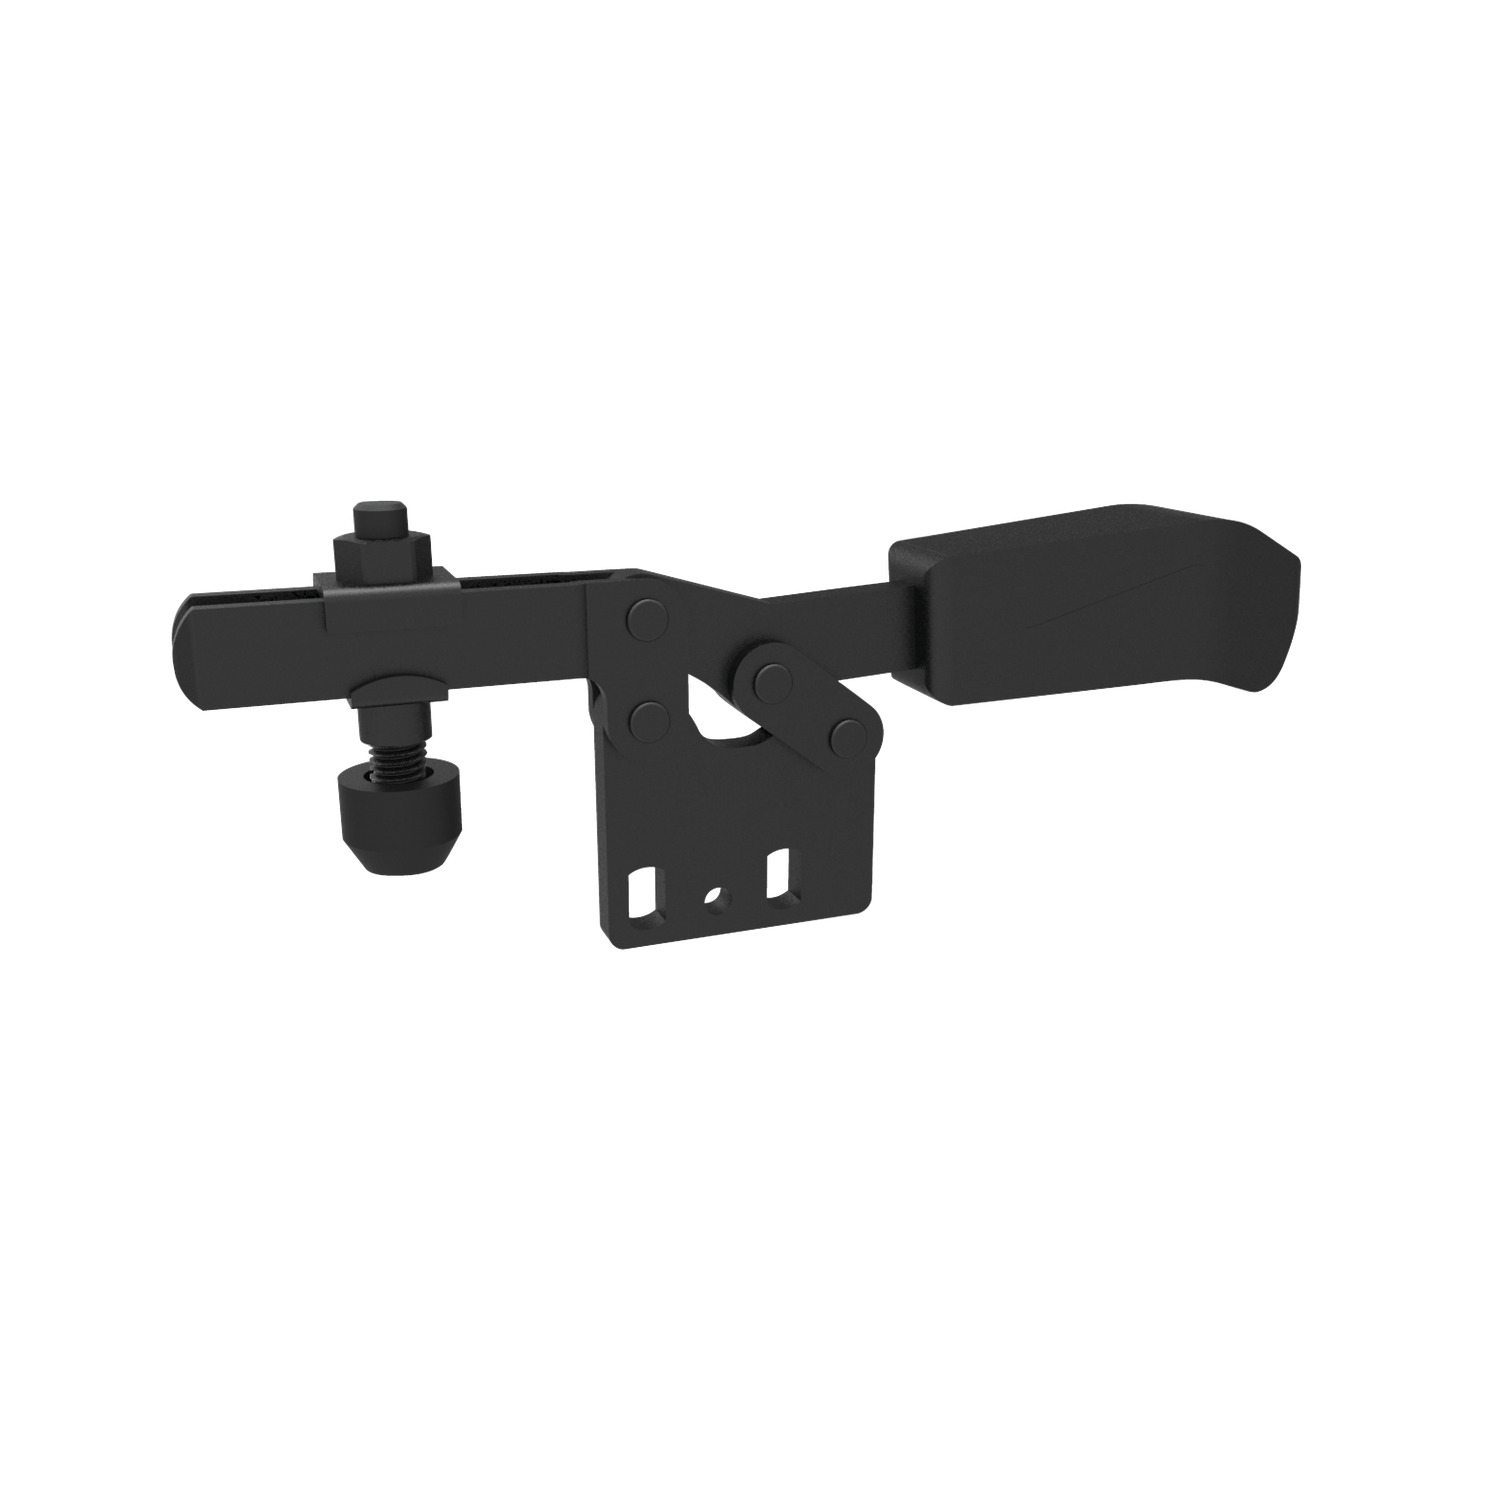 41050.2 Horizontal Acting Toggle Clamps